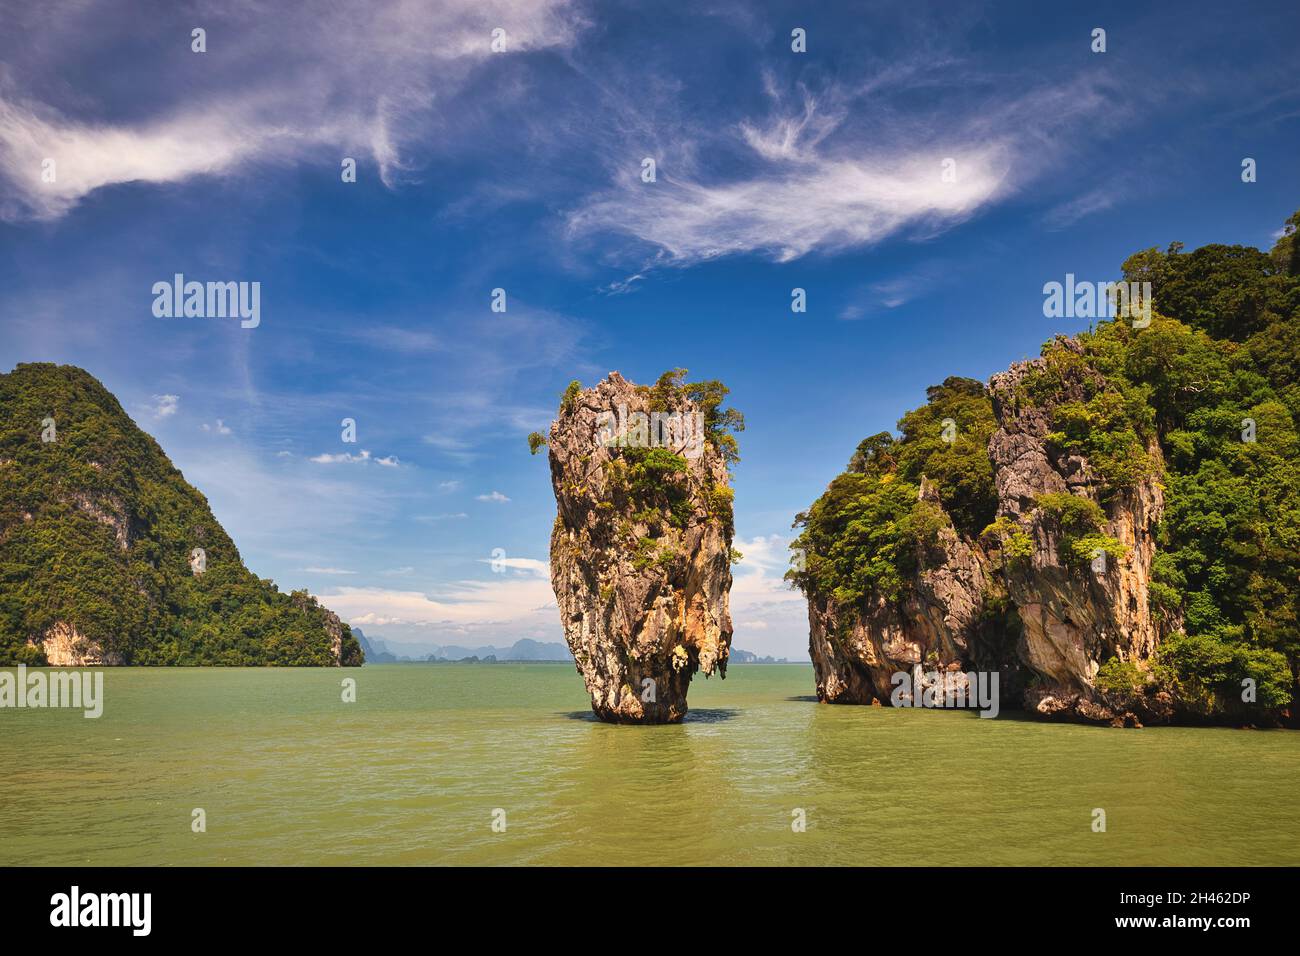 Tropical islands view at James bond island (Khao Tapu) with ocean blue sea water, Phang Nga Thailand nature landscape Stock Photo